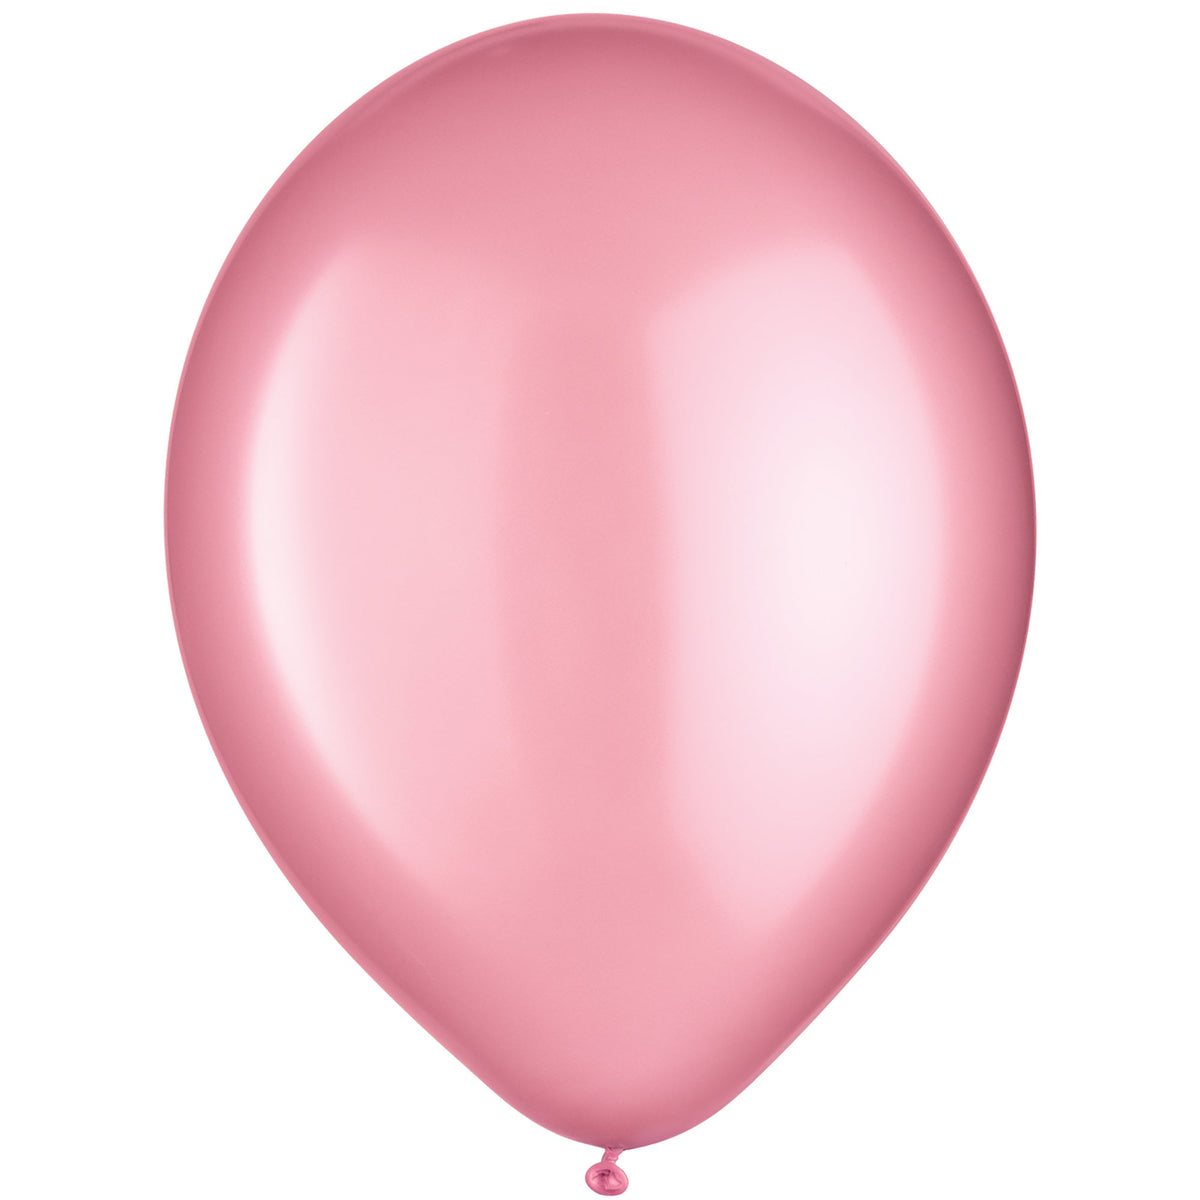 New Pink Pearlized Solid Color 12" helium quality 72 count Latex  Balloons